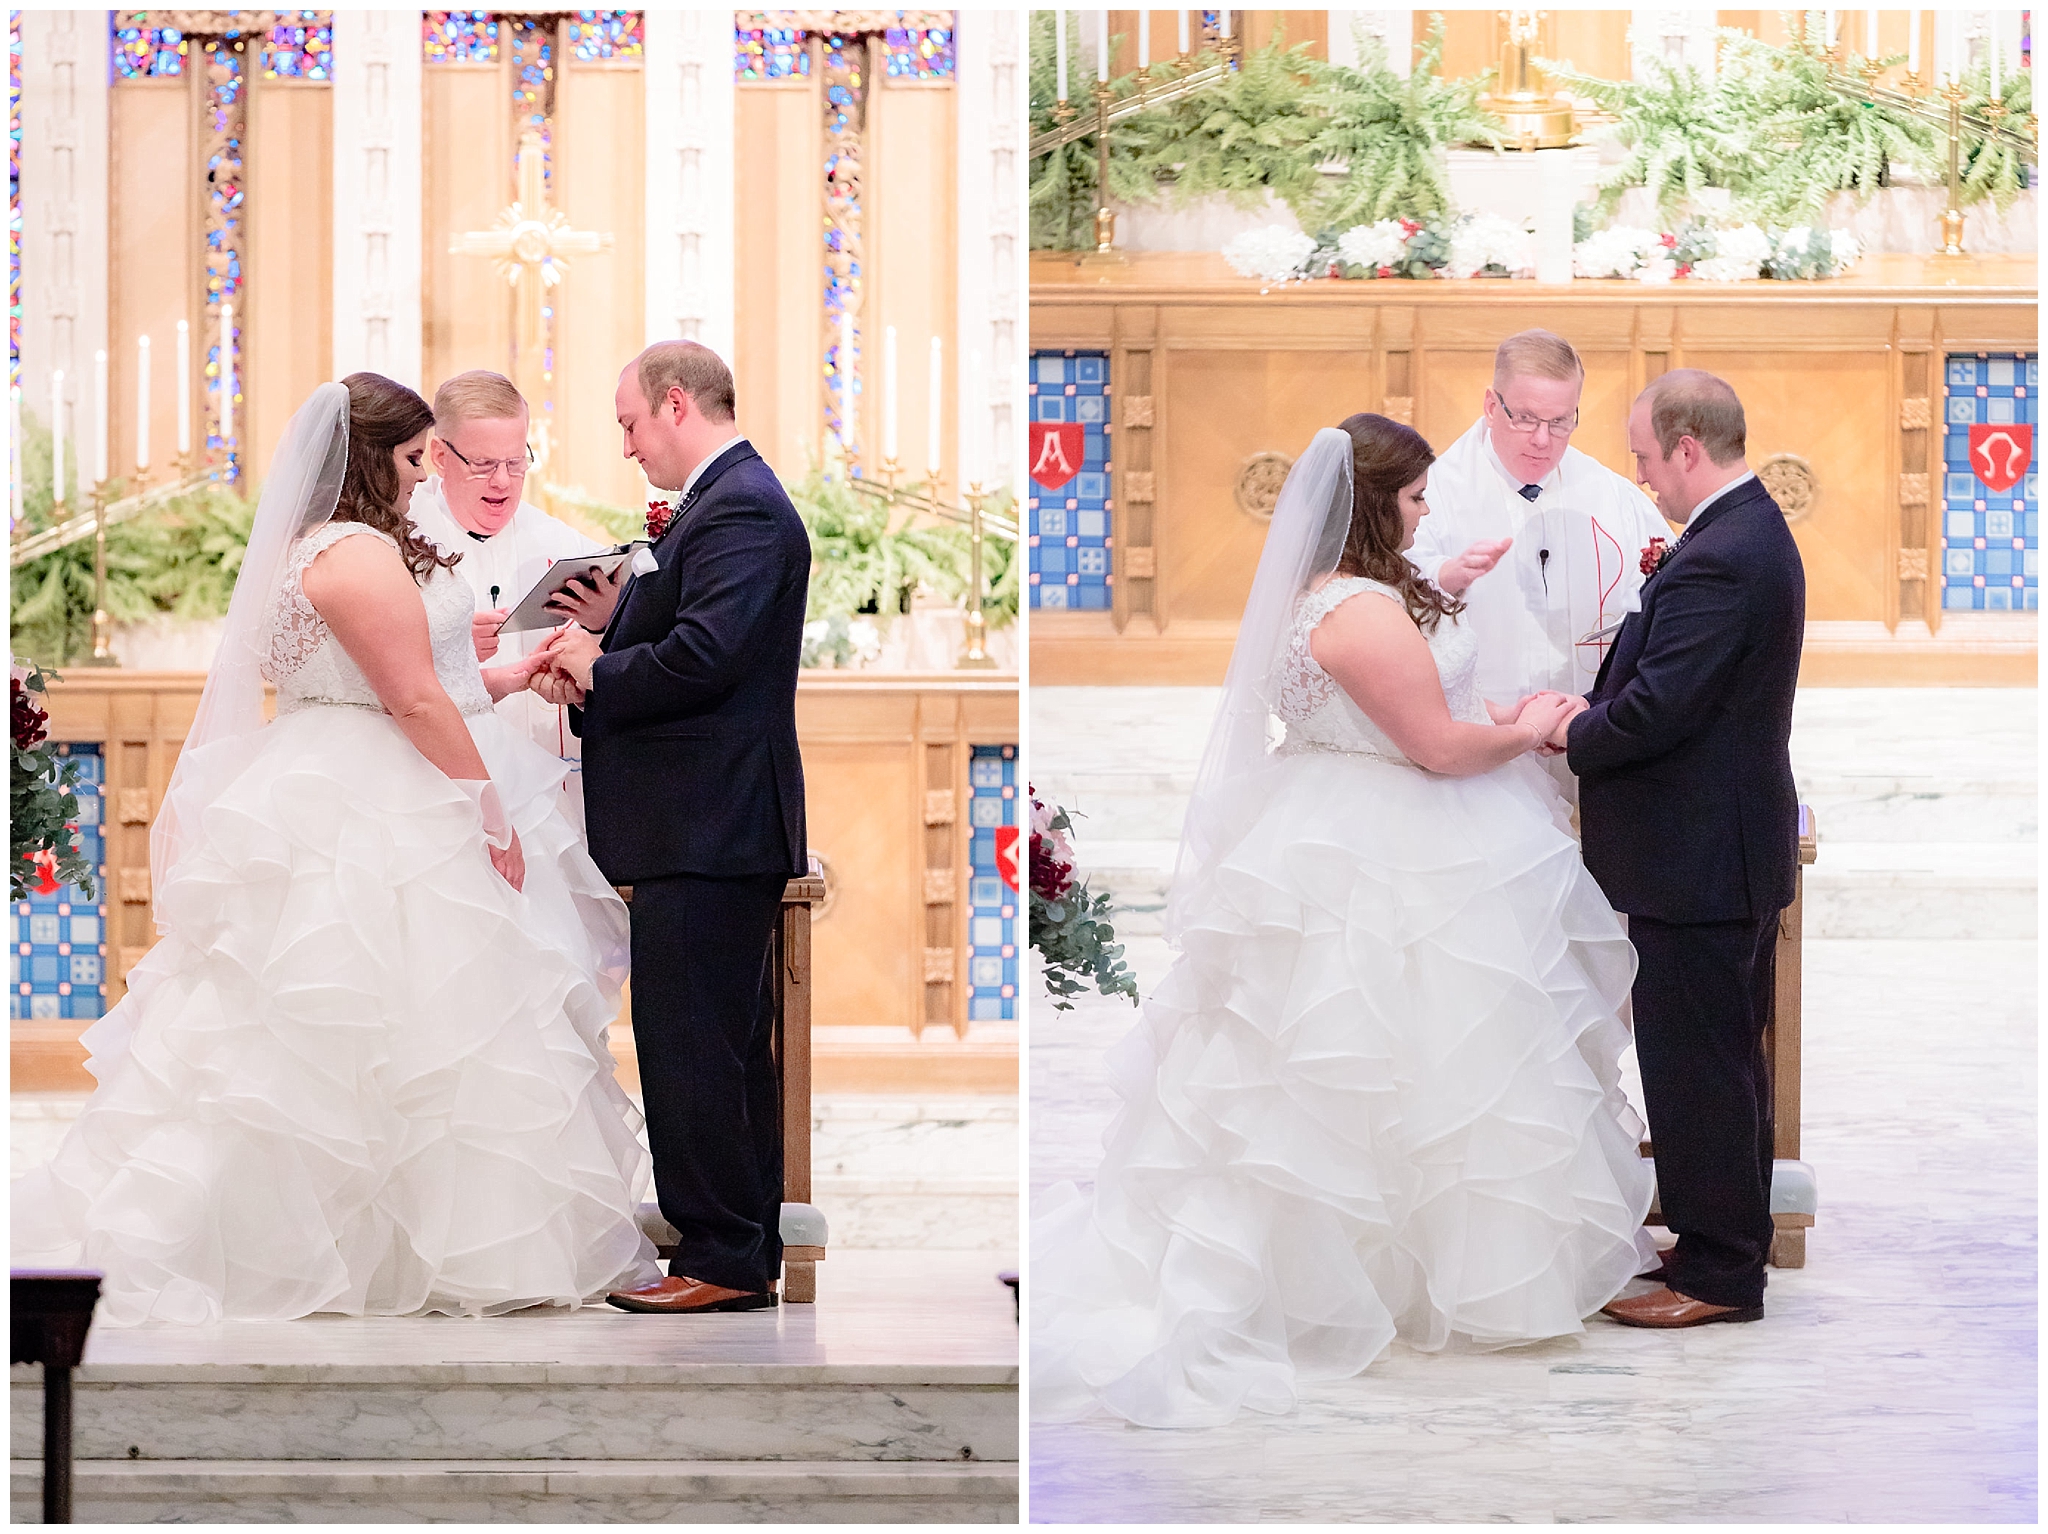 Bride and groom exchanging their vows at a Mt. Lebanon United Methodist Church wedding